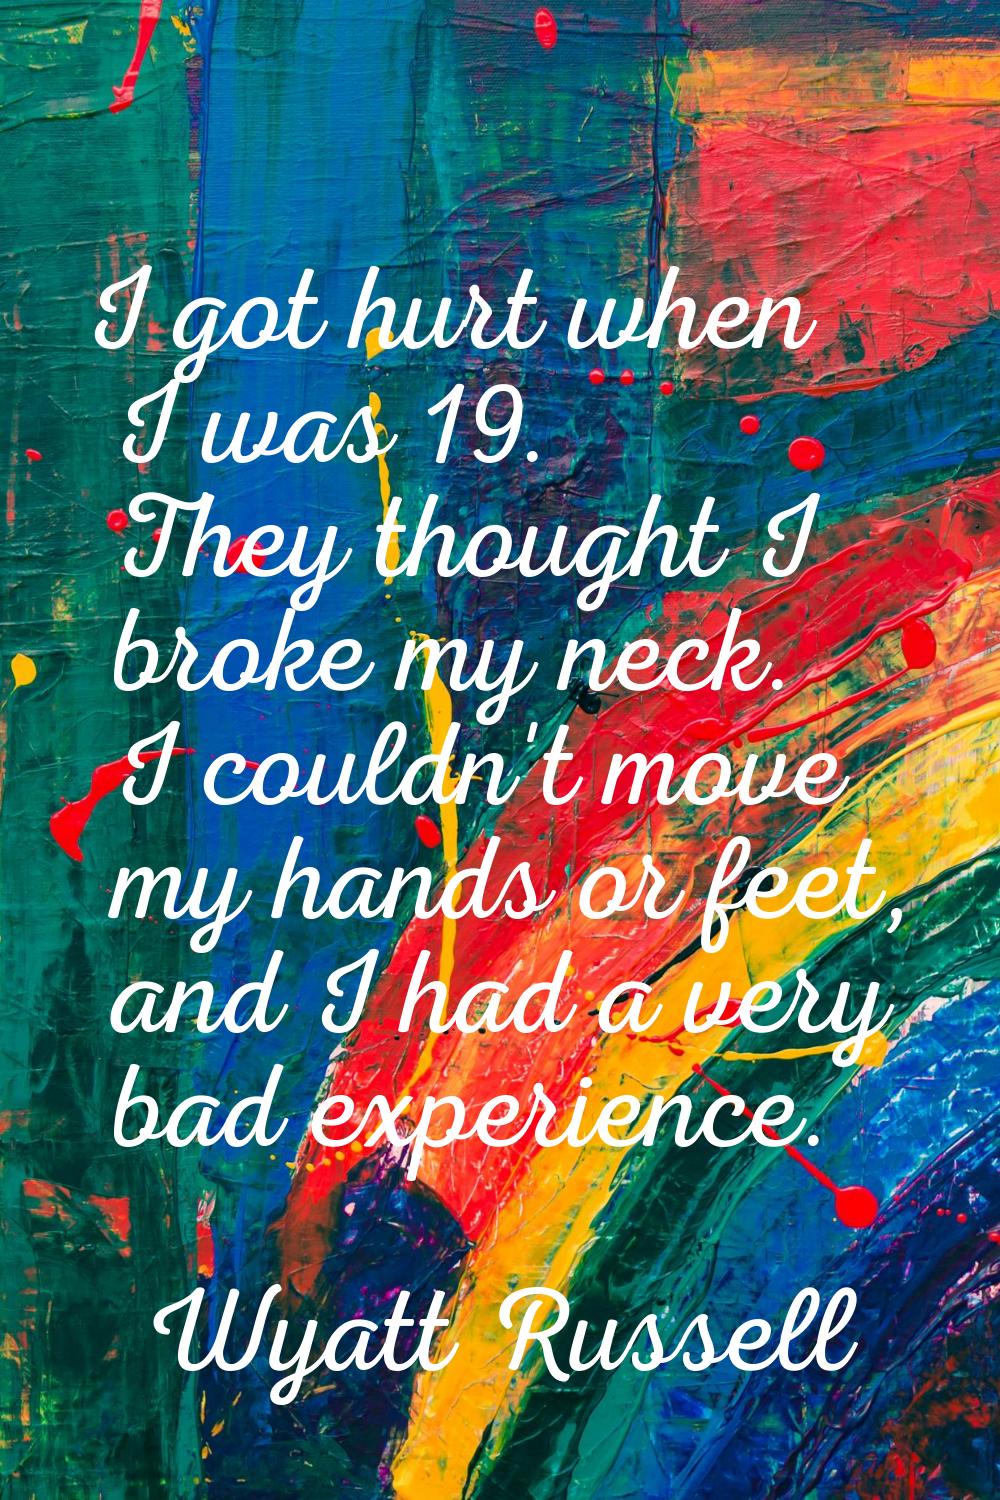 I got hurt when I was 19. They thought I broke my neck. I couldn't move my hands or feet, and I had